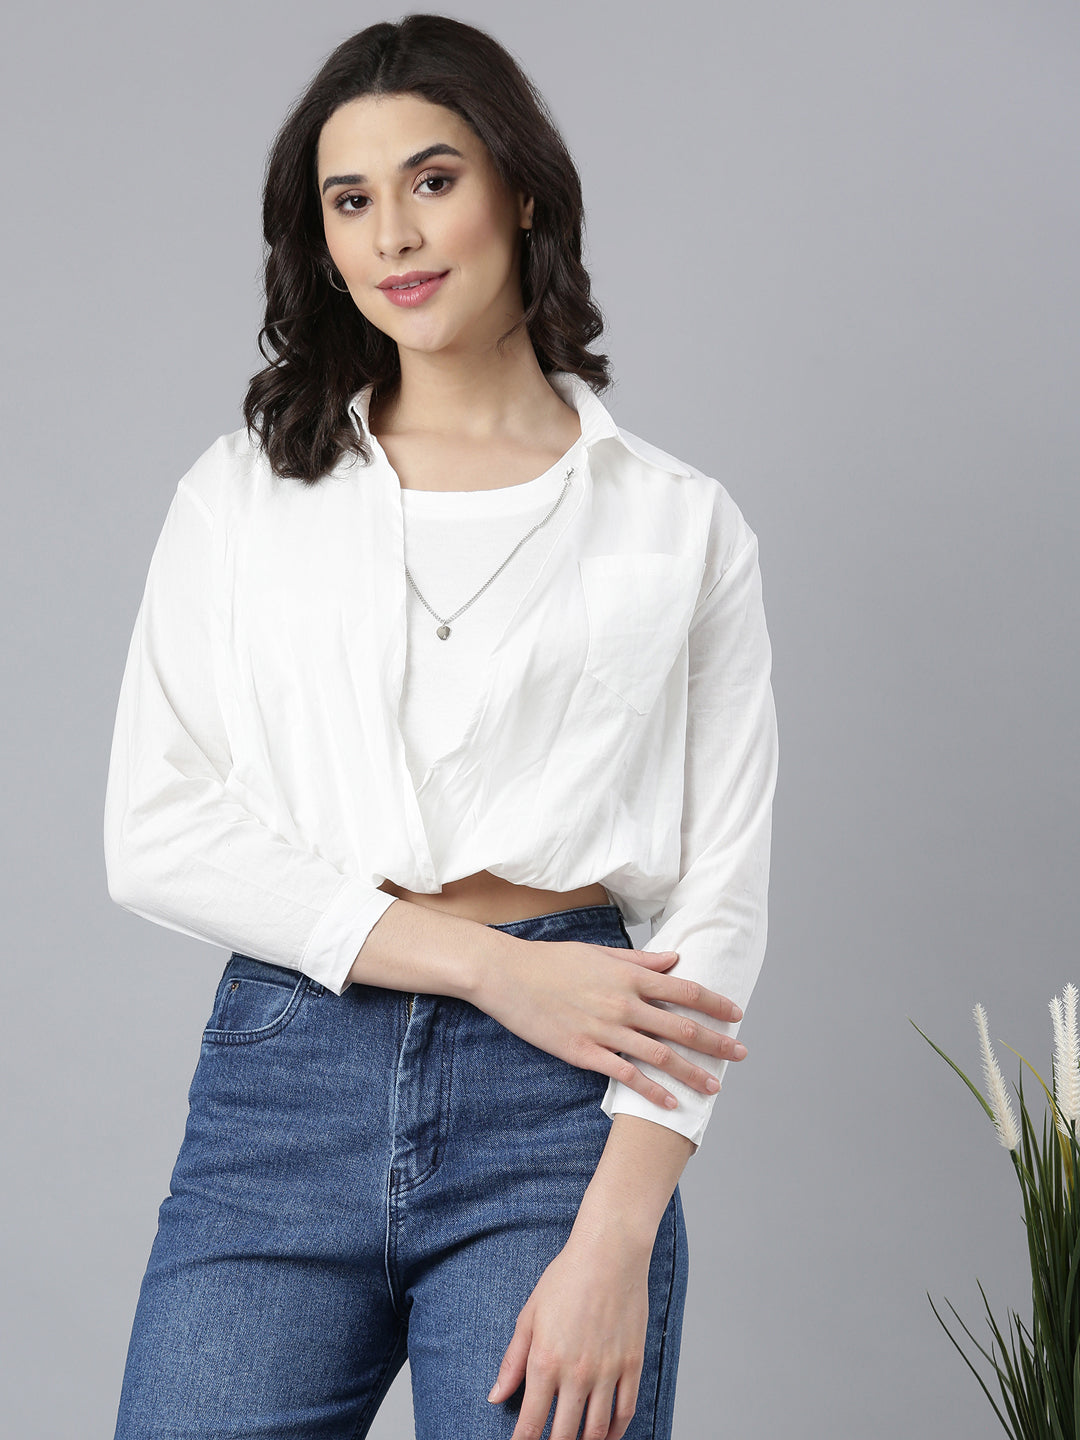 Women Solid Off White Shirt Style Top Comes with Attached Inner Top and Neck Chain